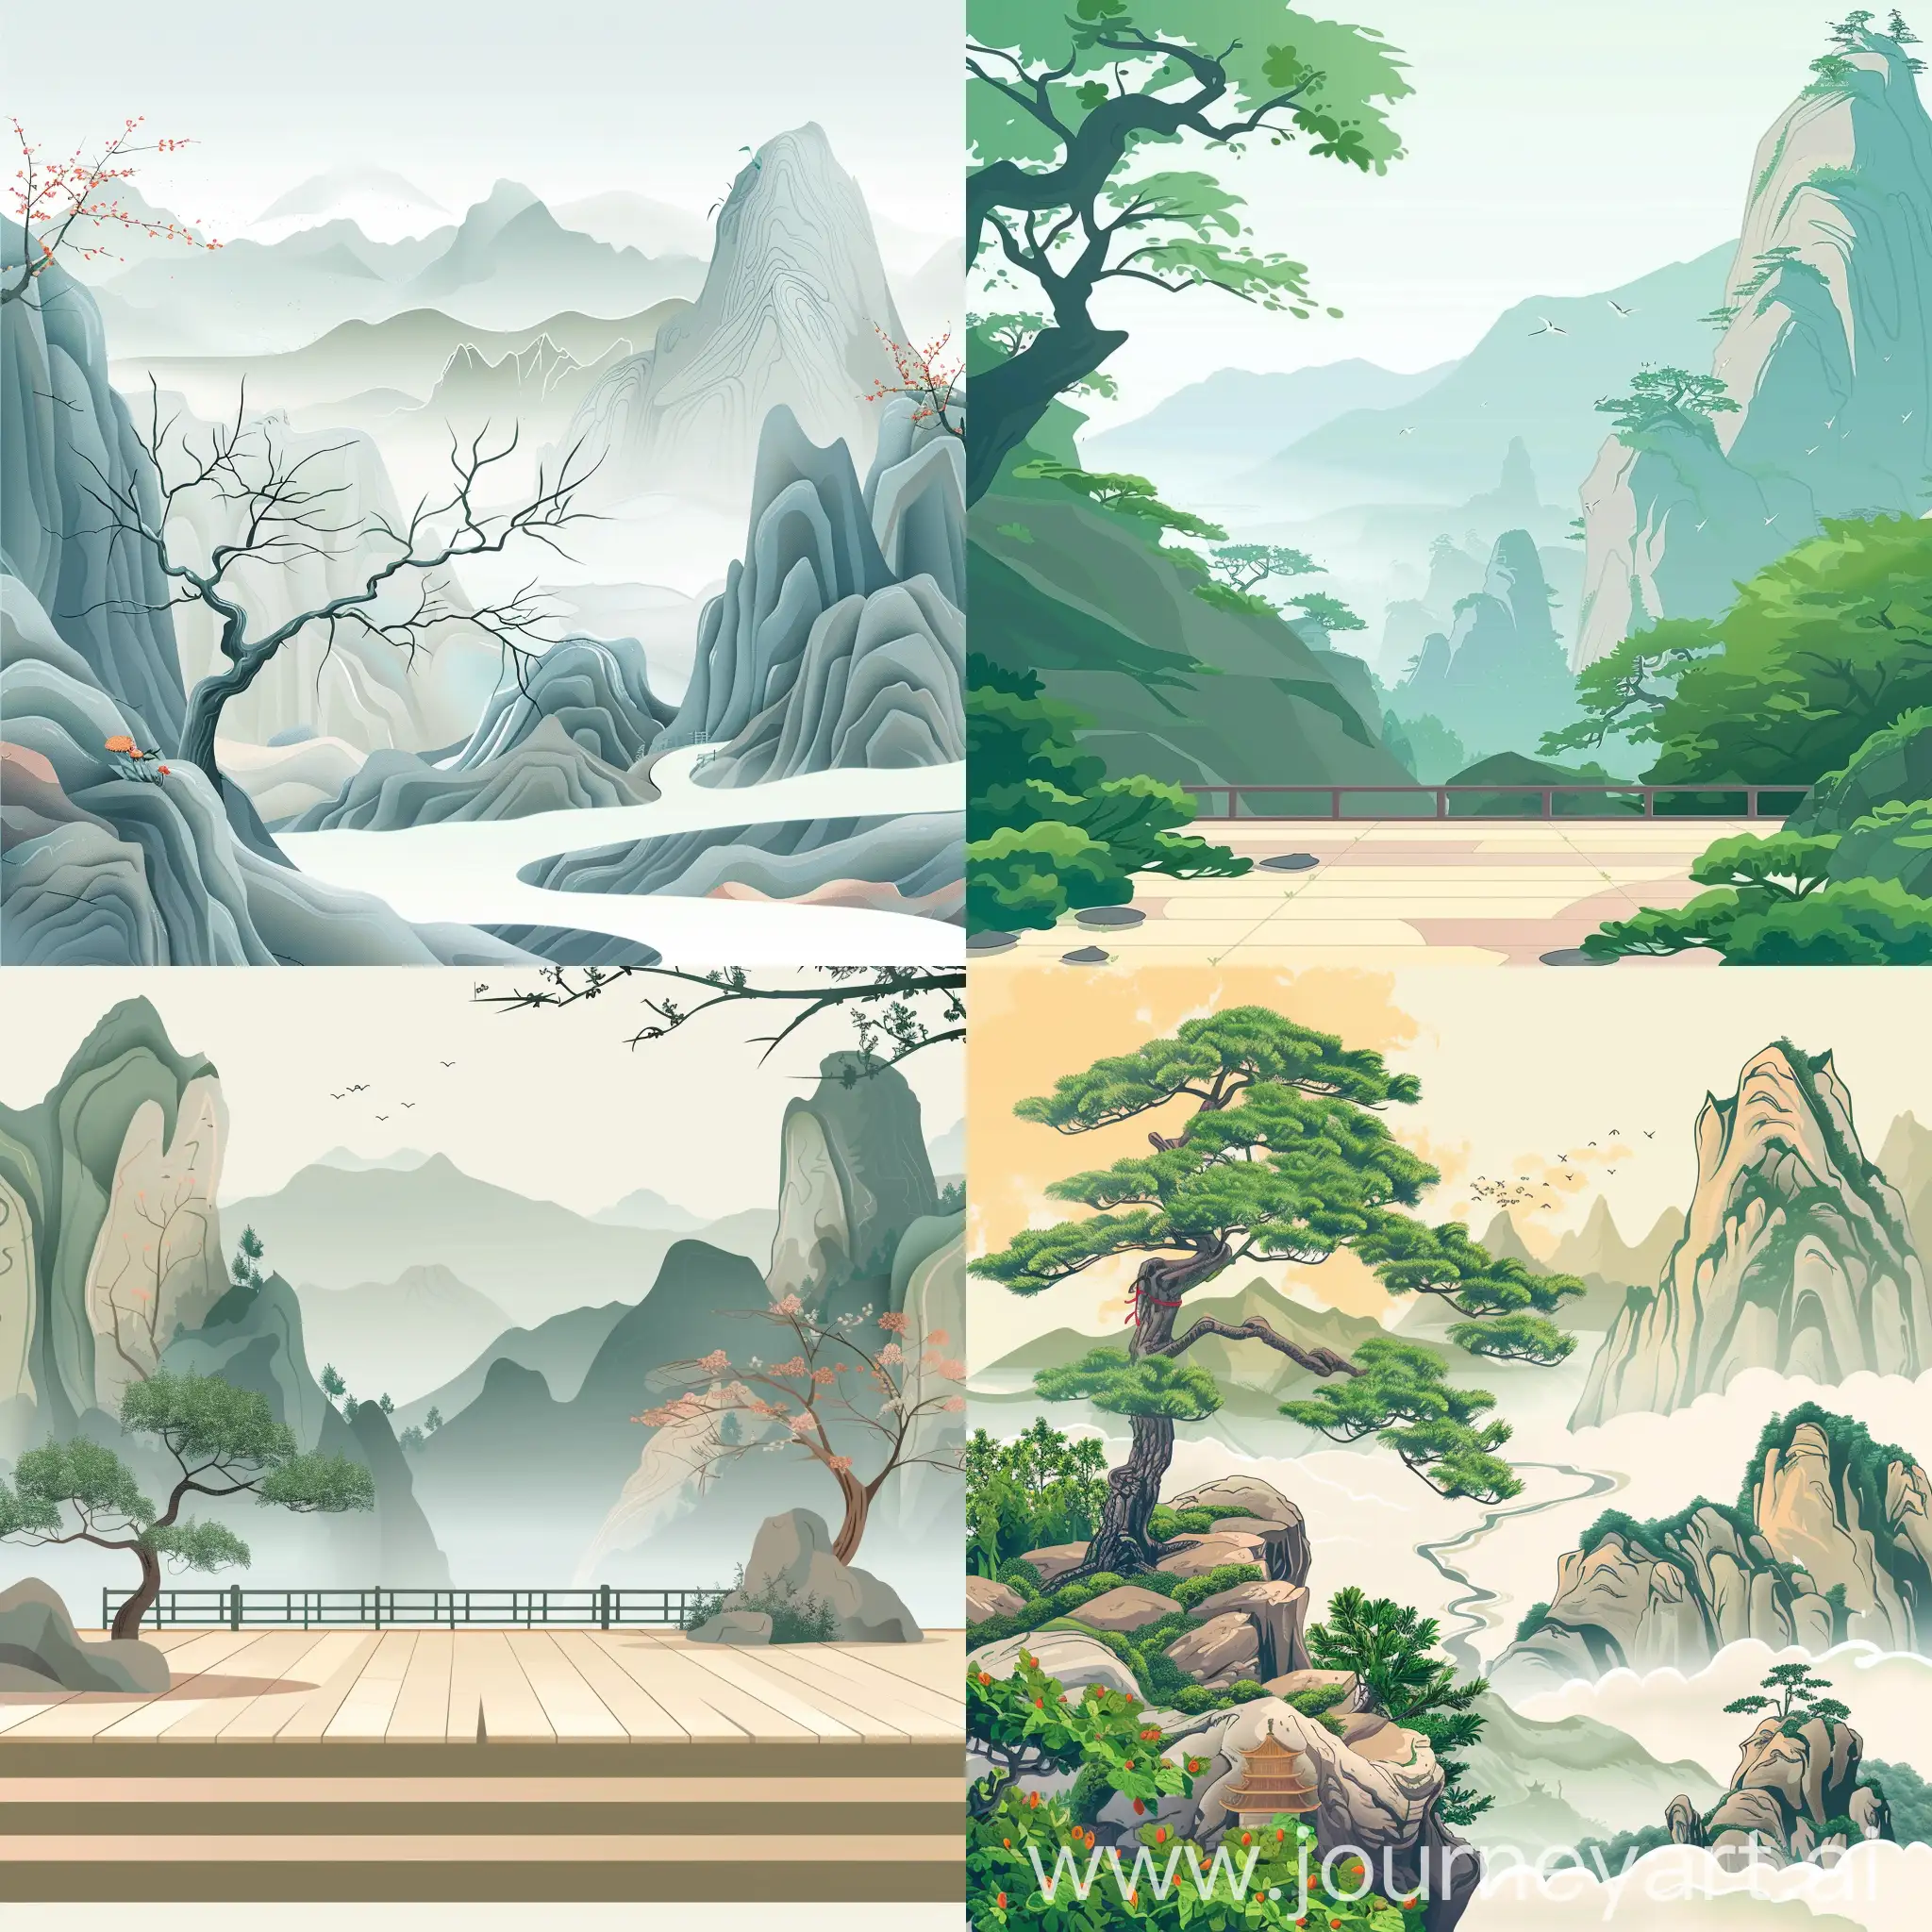 Chinese-Natural-Mountain-and-Tree-Exhibition-Stage-Scene-Illustration